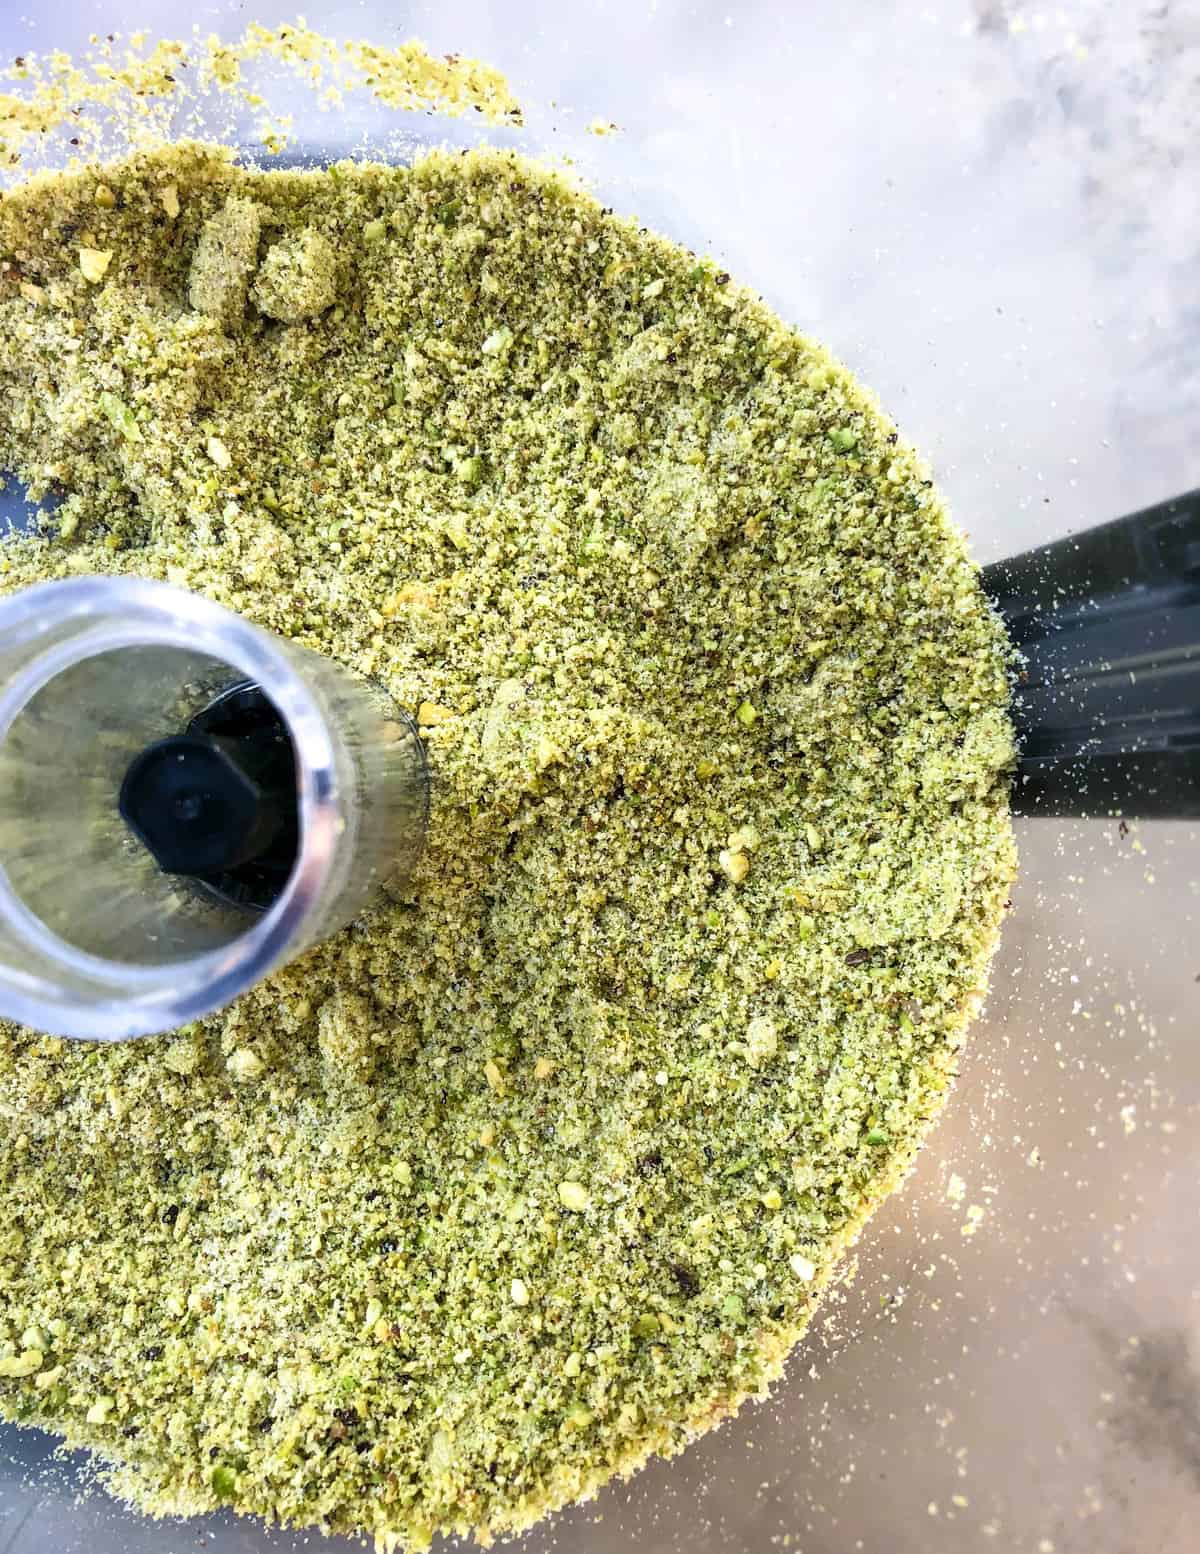 We grind them together in a food processor until it forms a nice crumble.